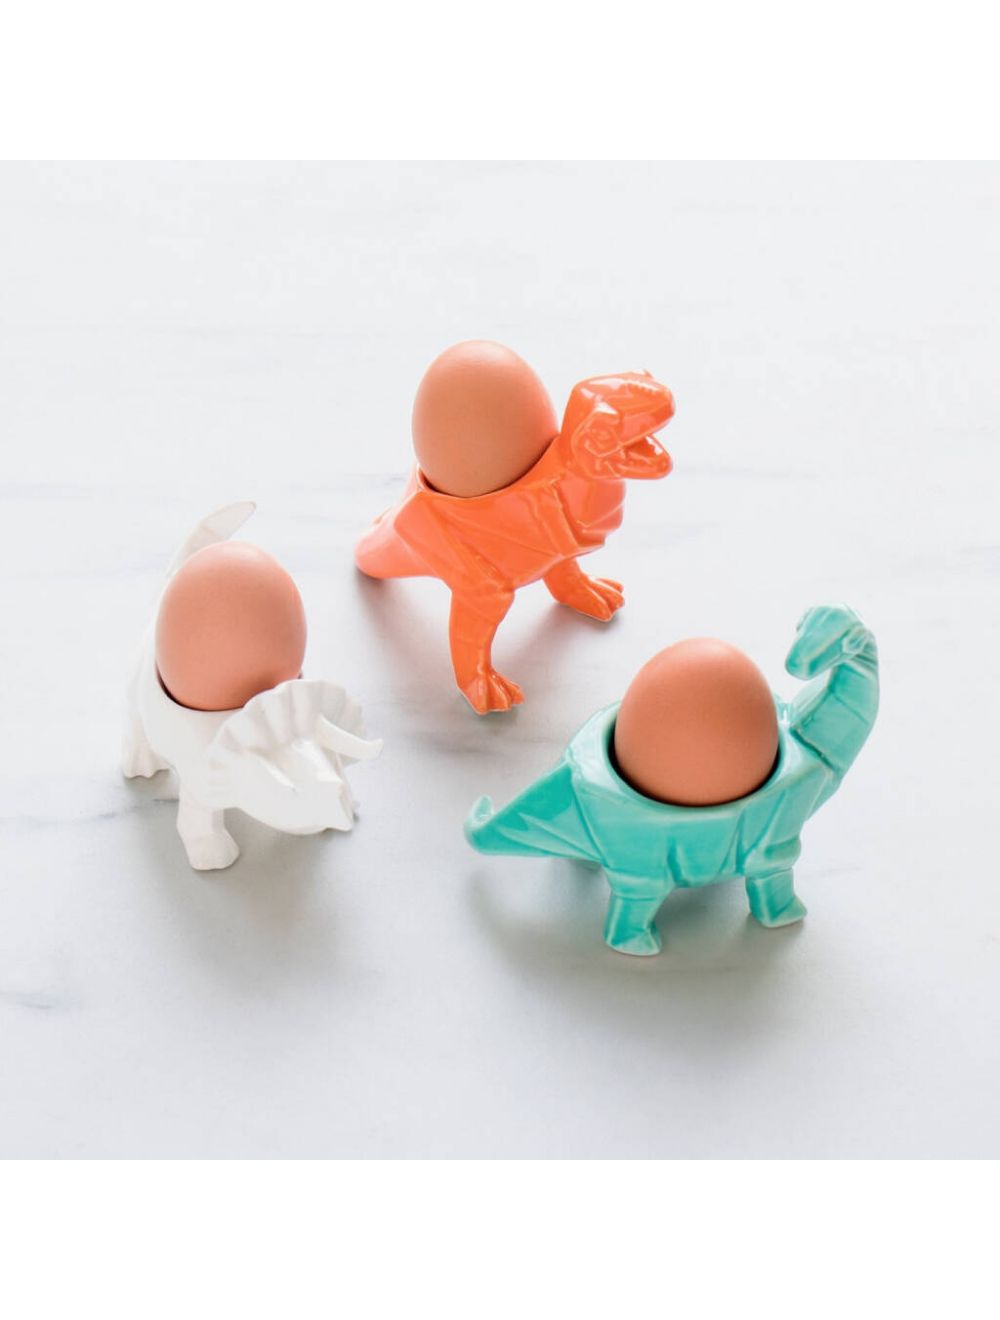 animal shaped egg cups for children and adults to enjoy. ceramic Cute Crockery Critters T Rex Dinosaur Egg Cup from Deluxebase 